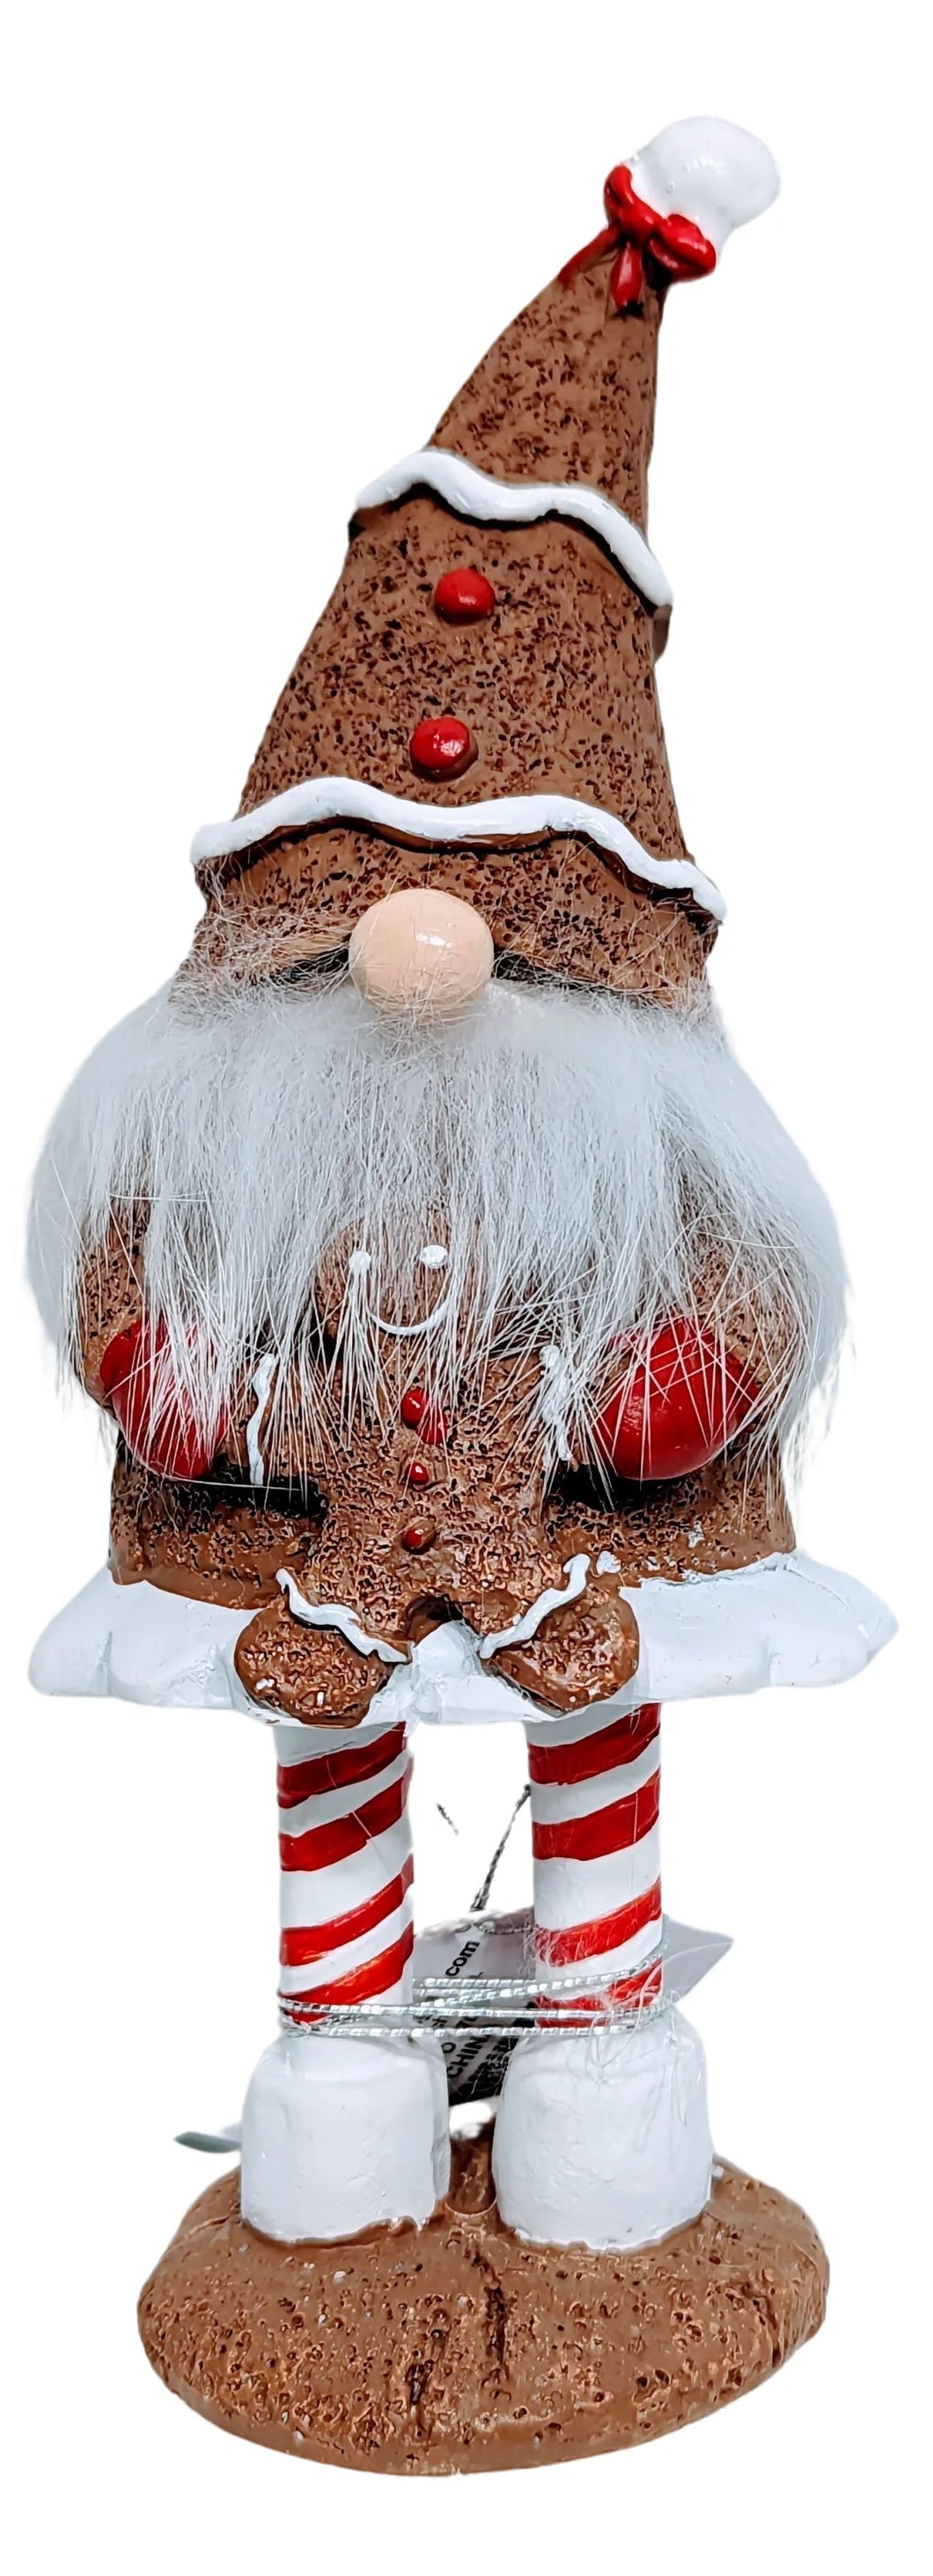 Gingerbread Gnome Figurine Holding A Gingerbread Man Cookie